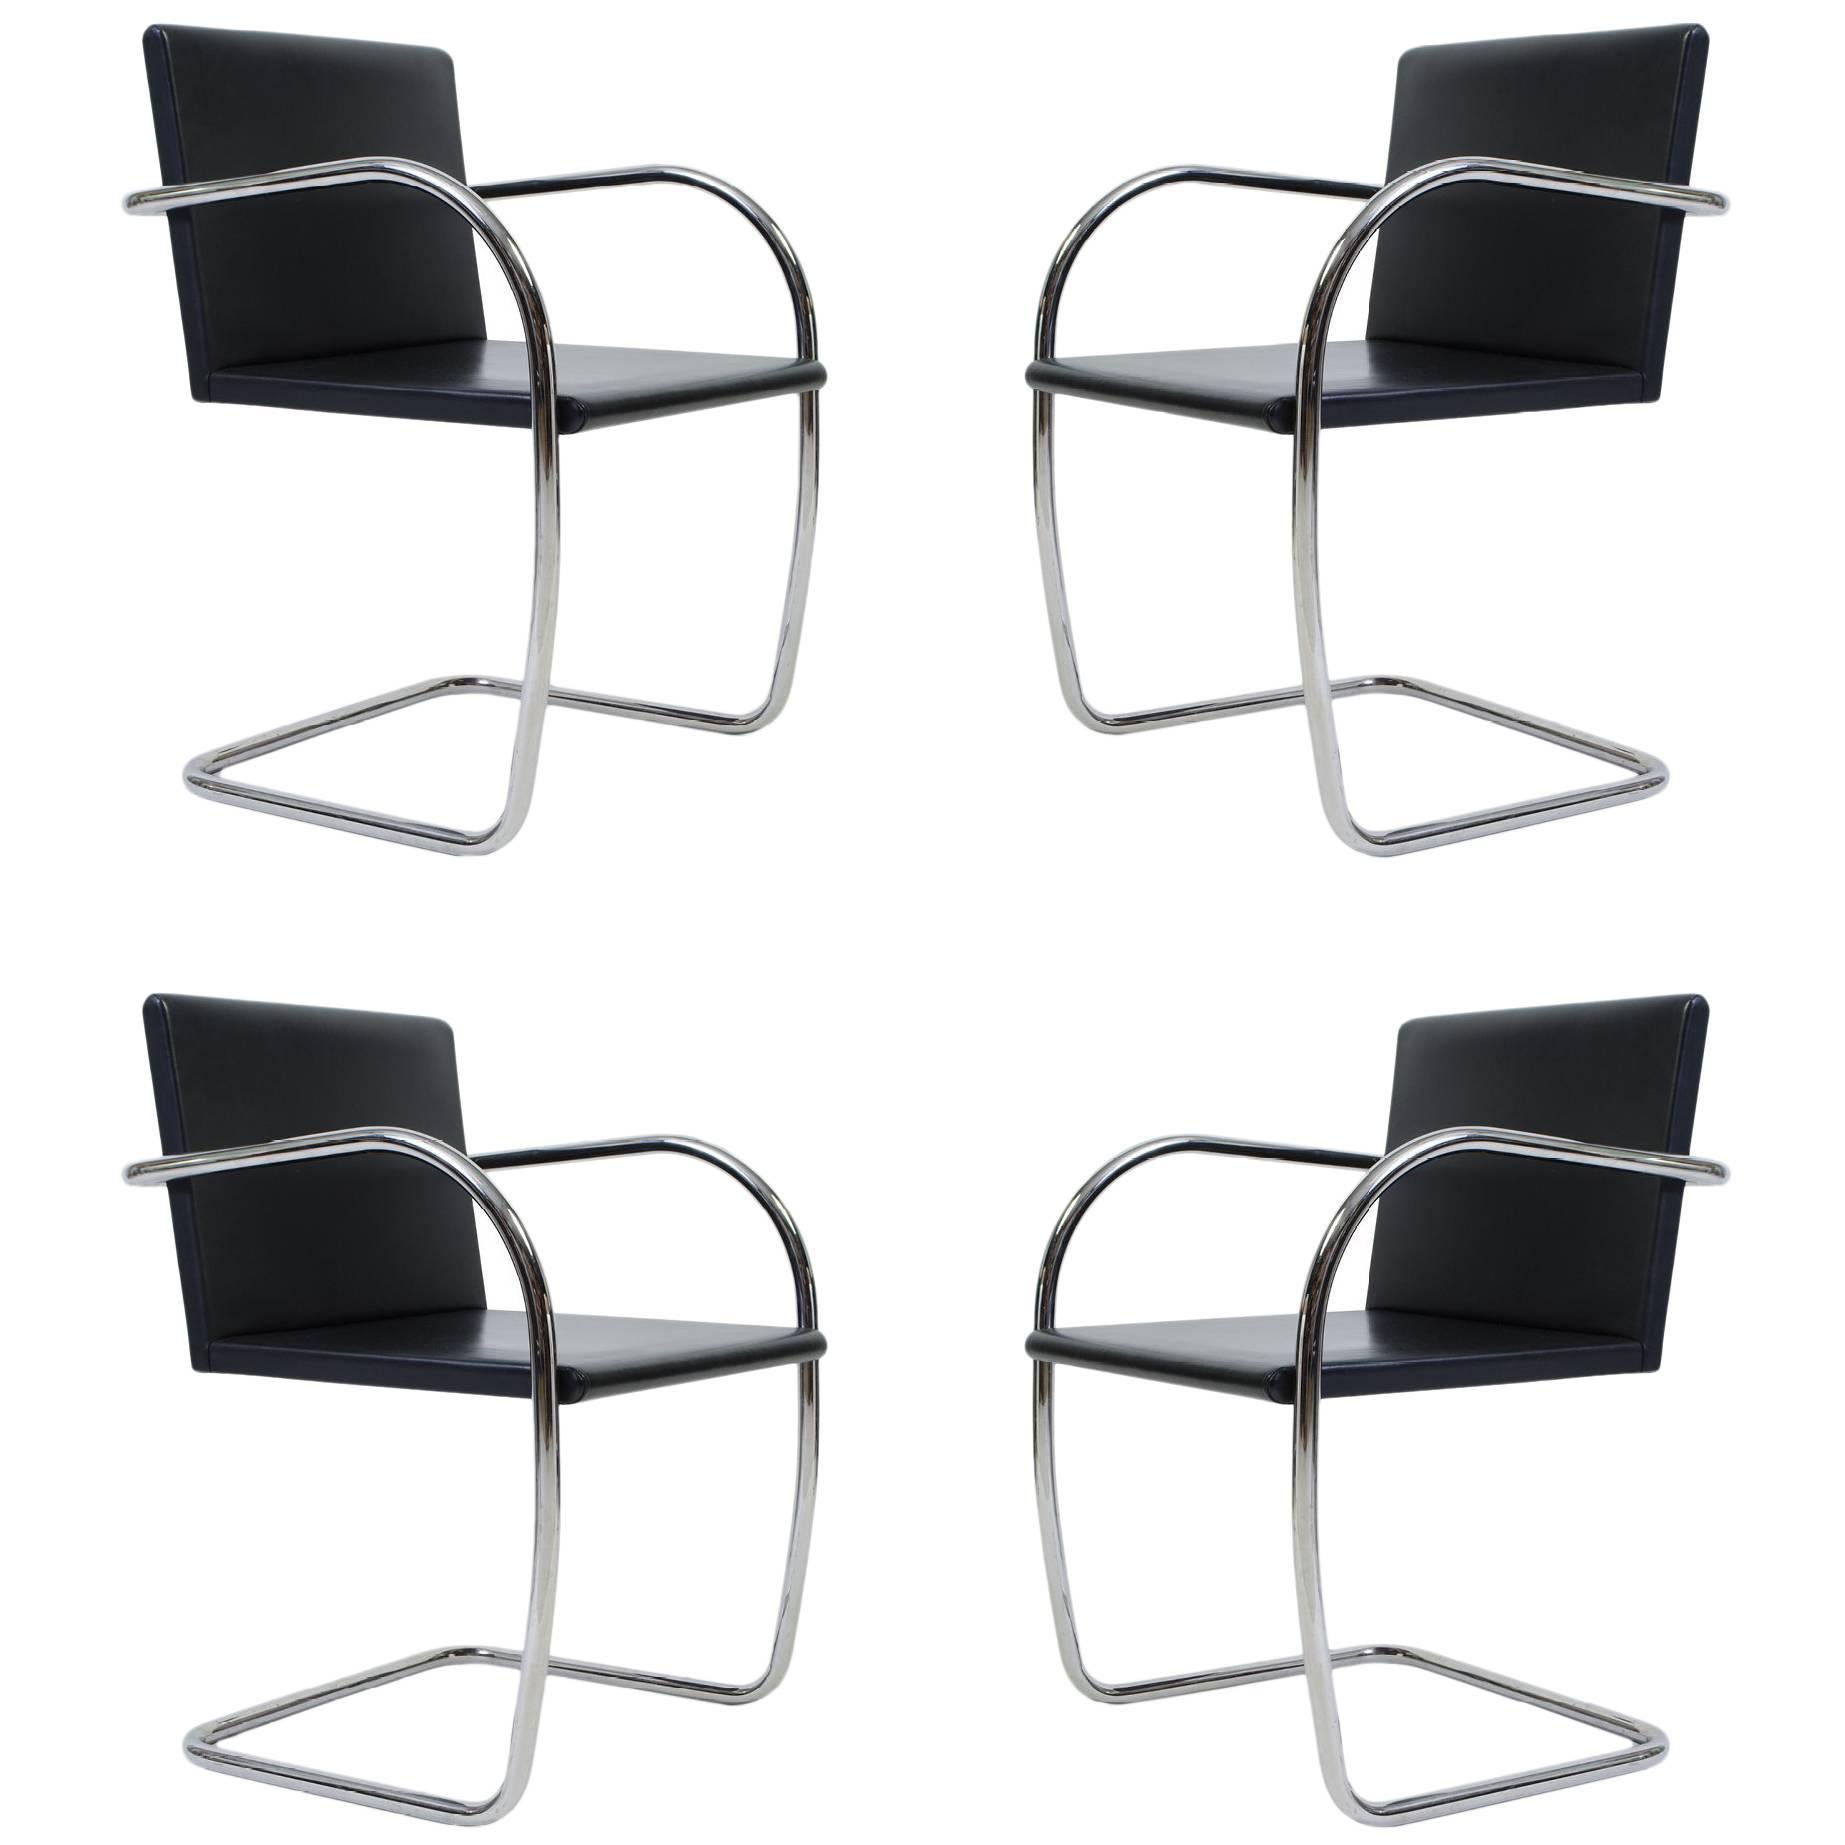 Brno Tubular Thin-Pad Chairs in Black Leather, Set of Four